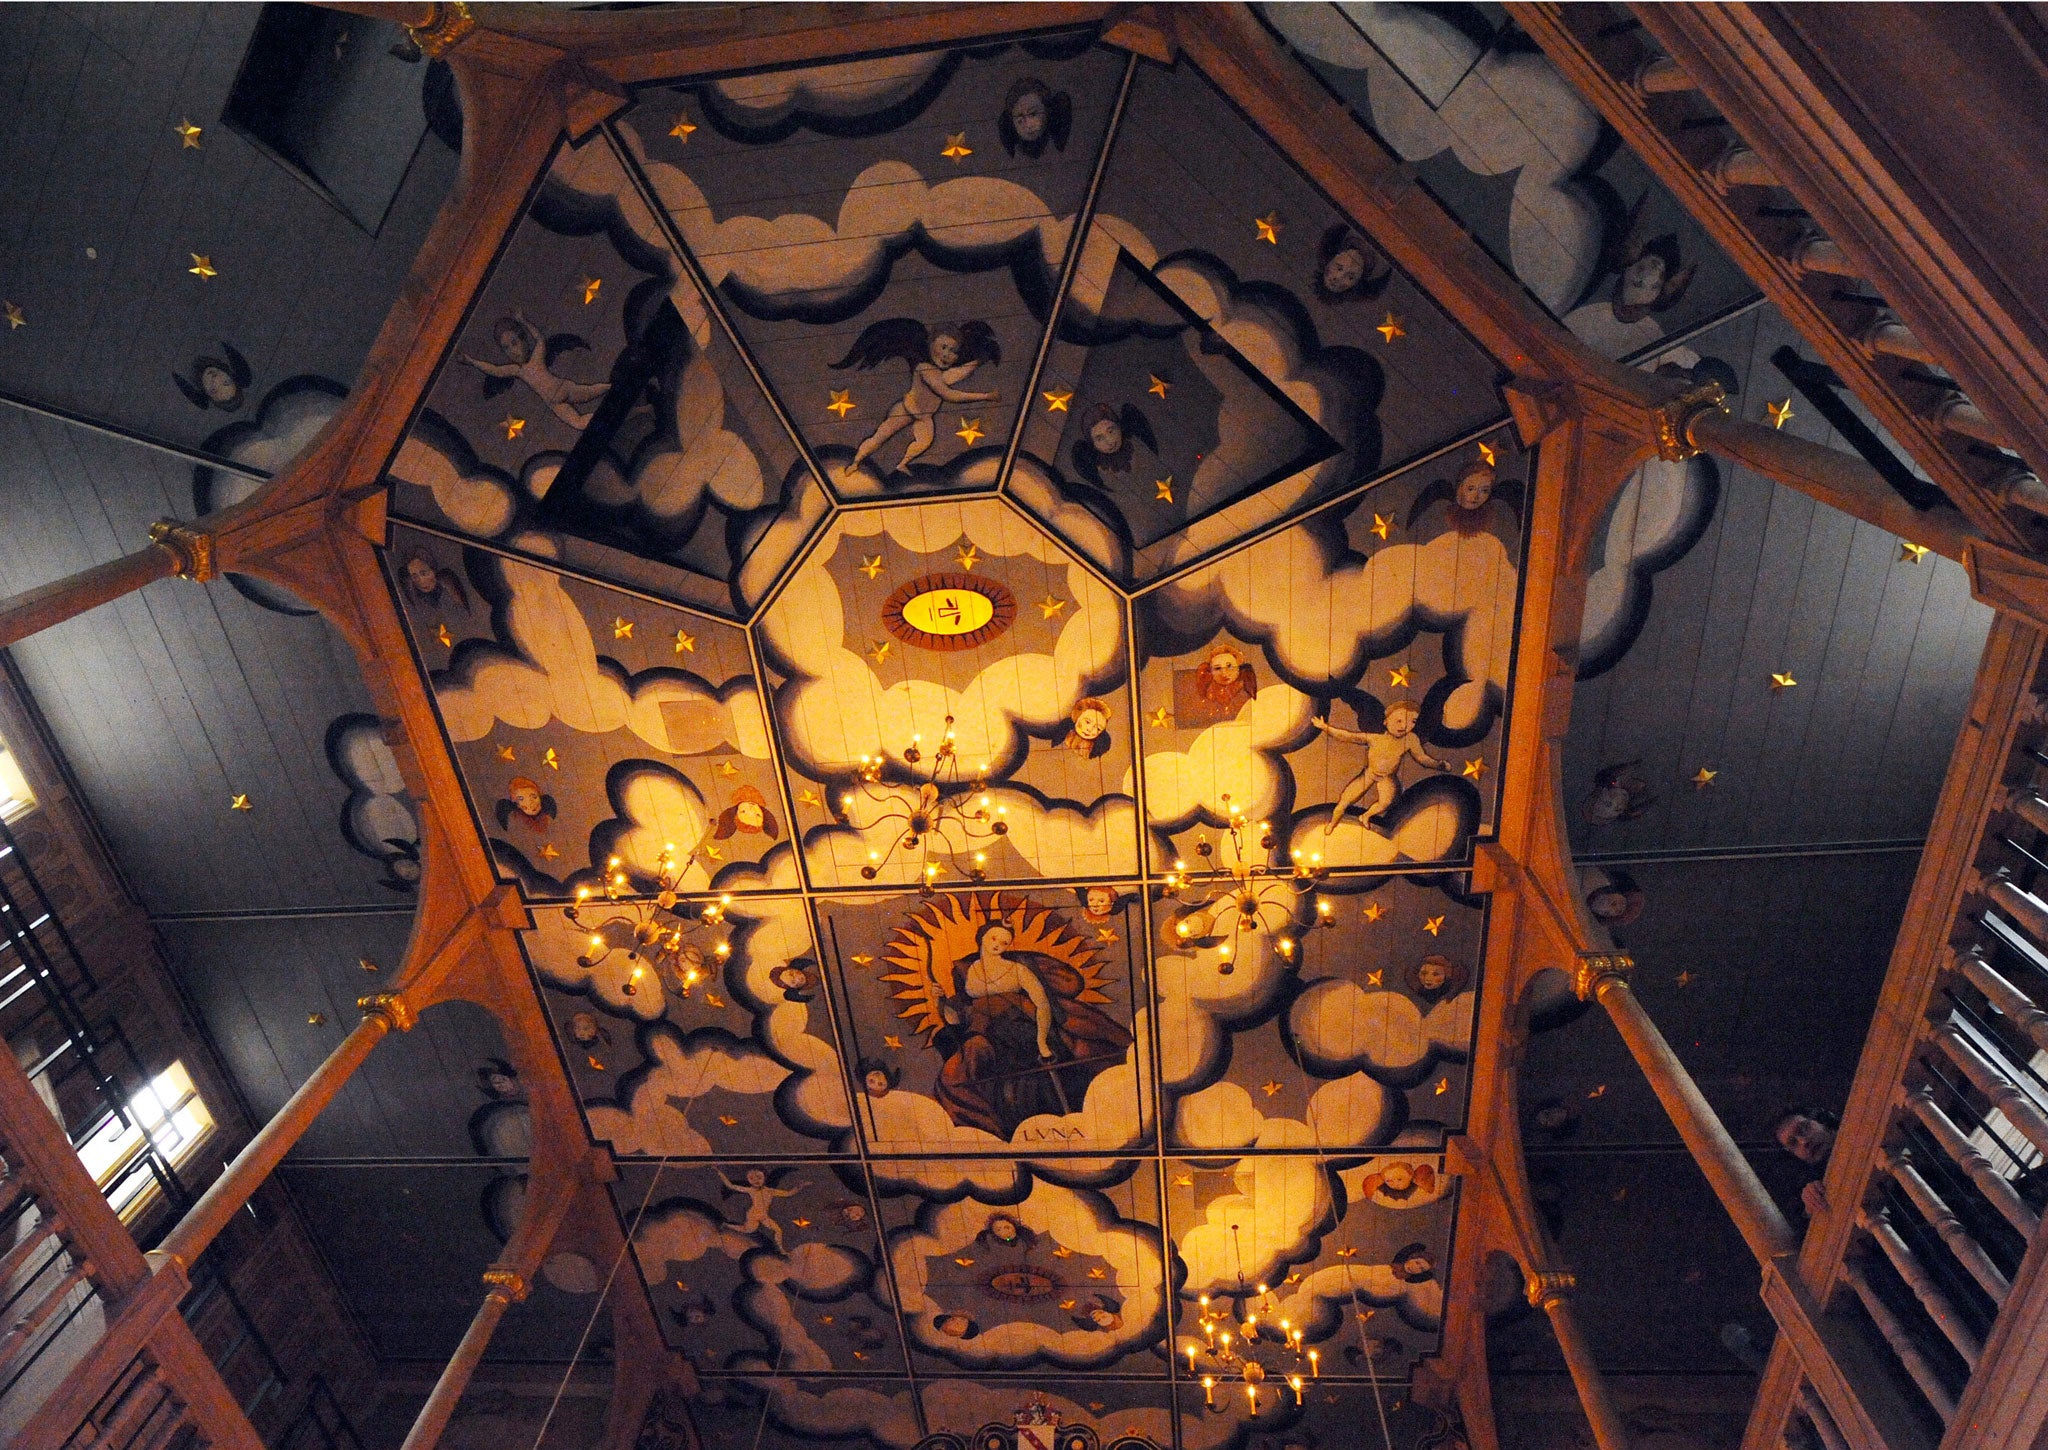 The decorative ceiling of the Sam Wanamaker Playhouse at Shakespeare's Globe